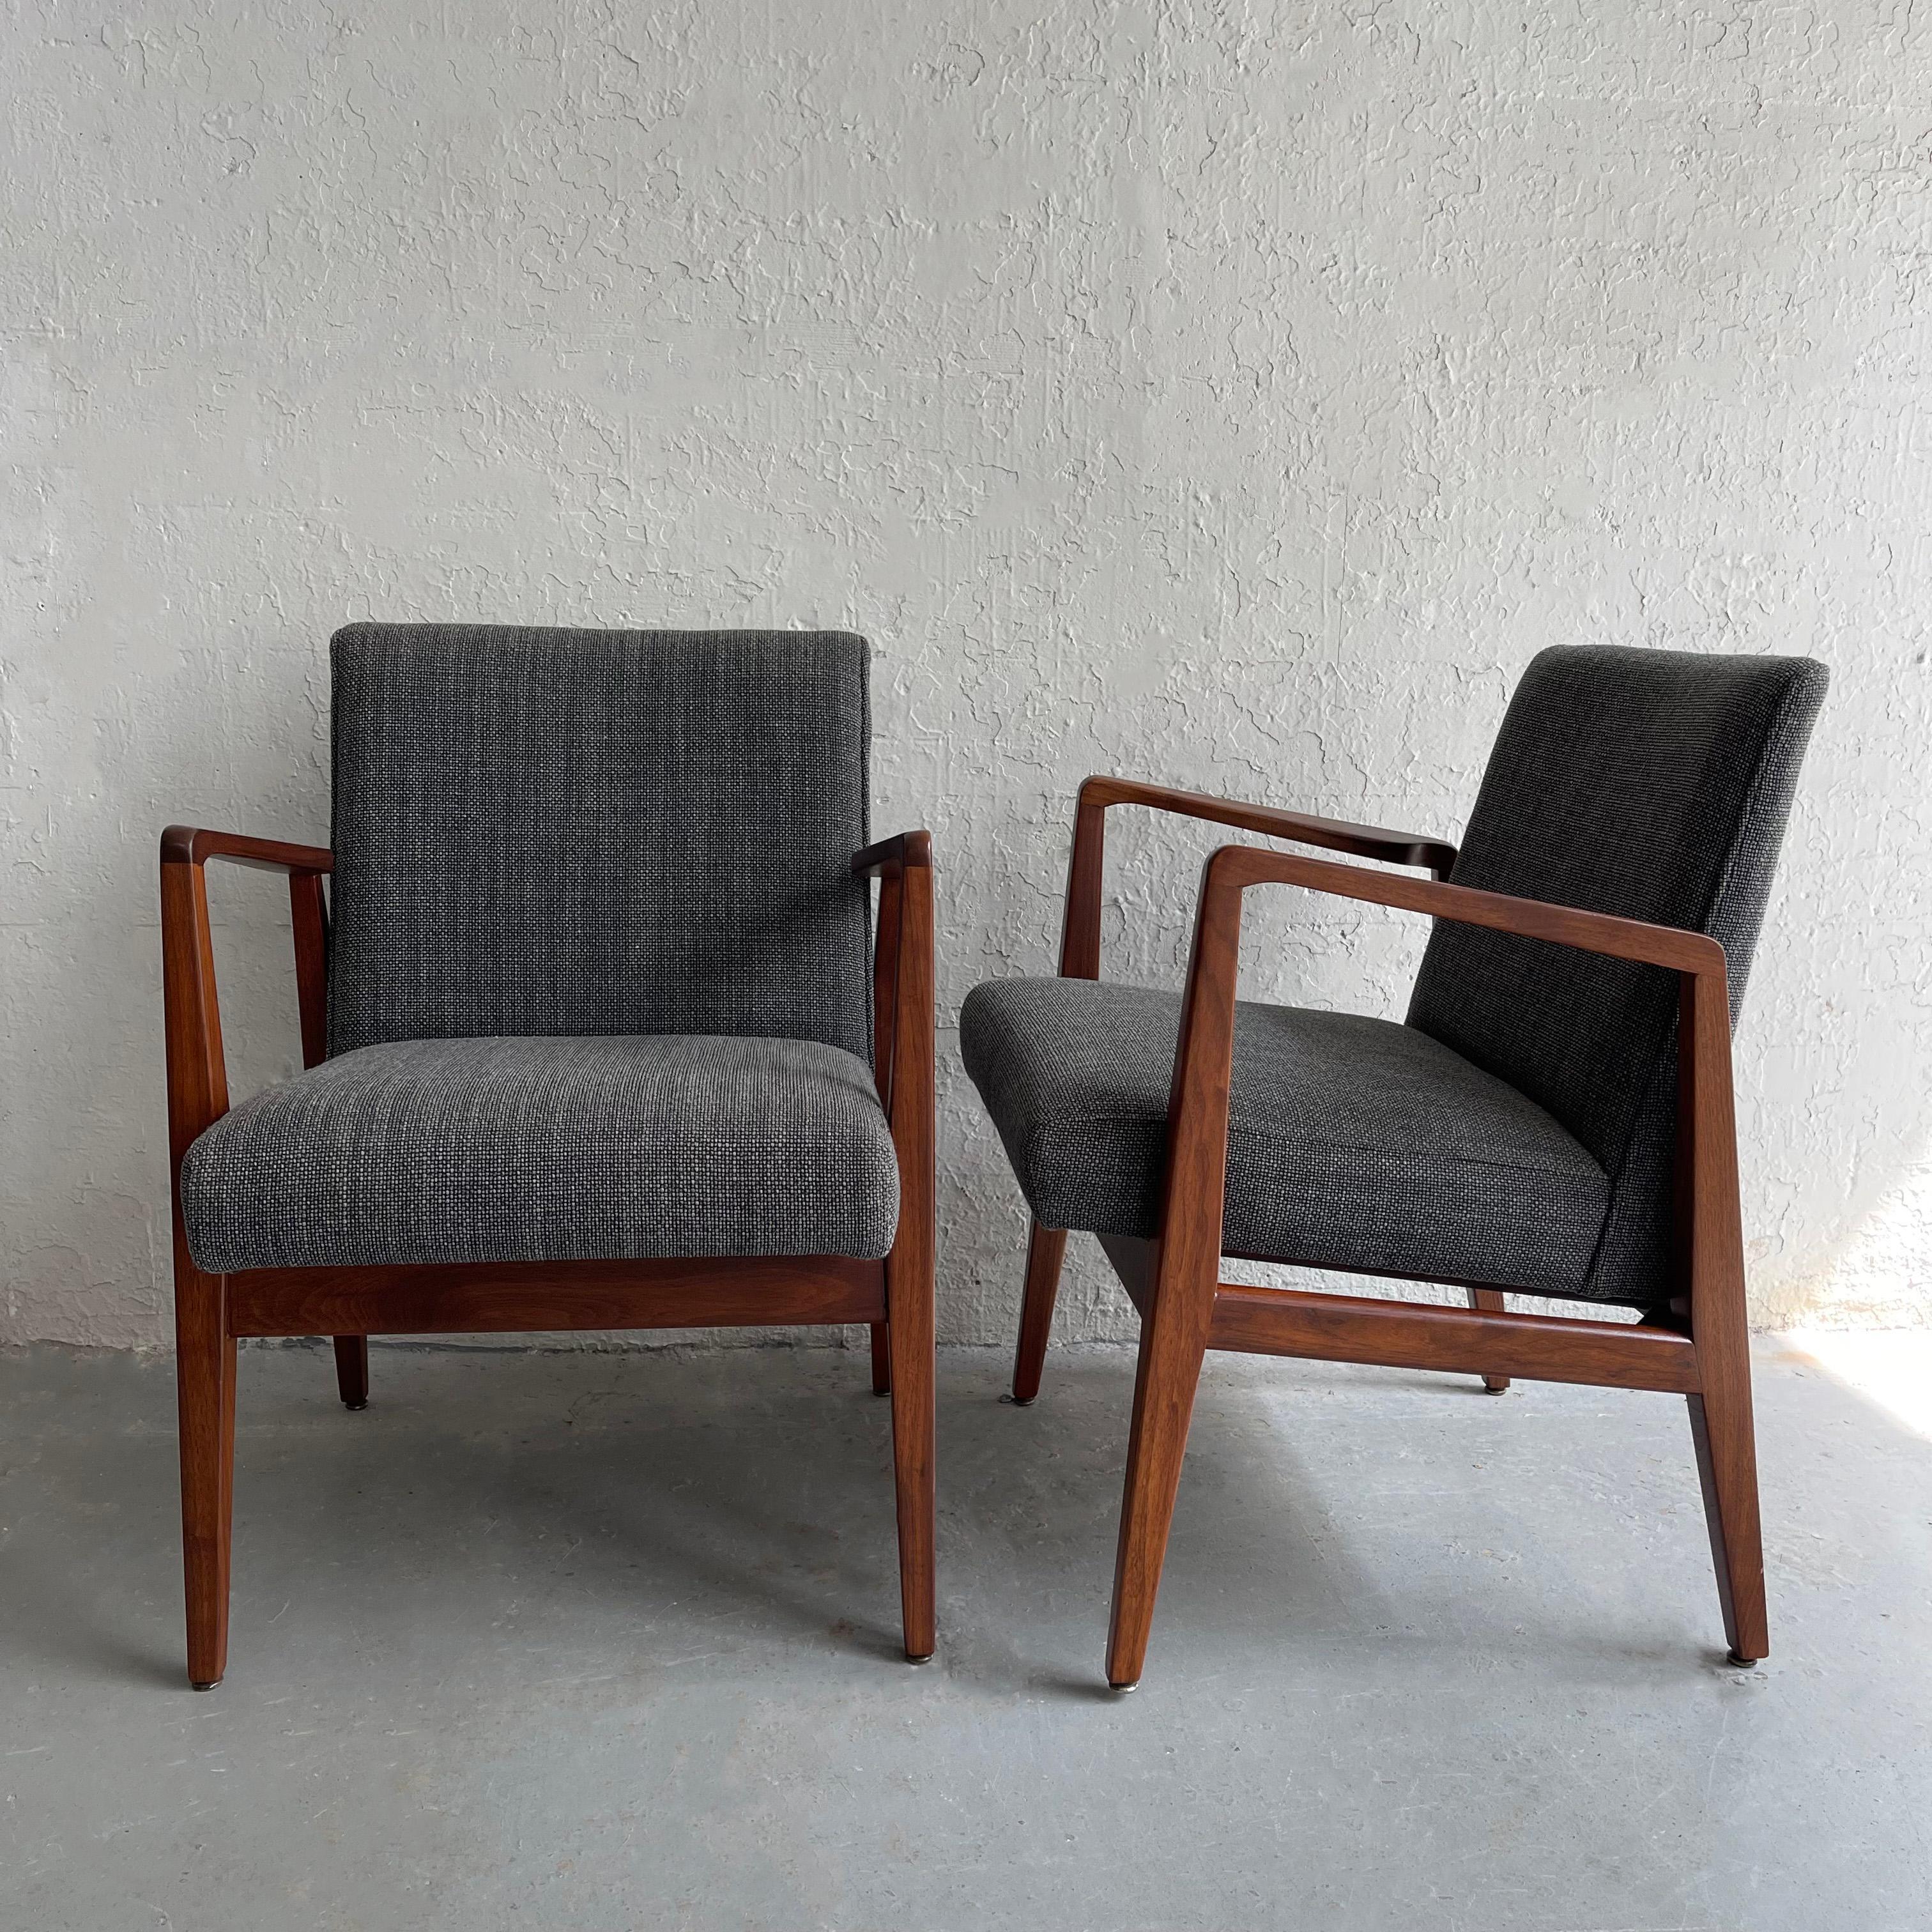 20th Century Pair Mid-Century Modern Walnut Armchairs by Jens Risom For Sale